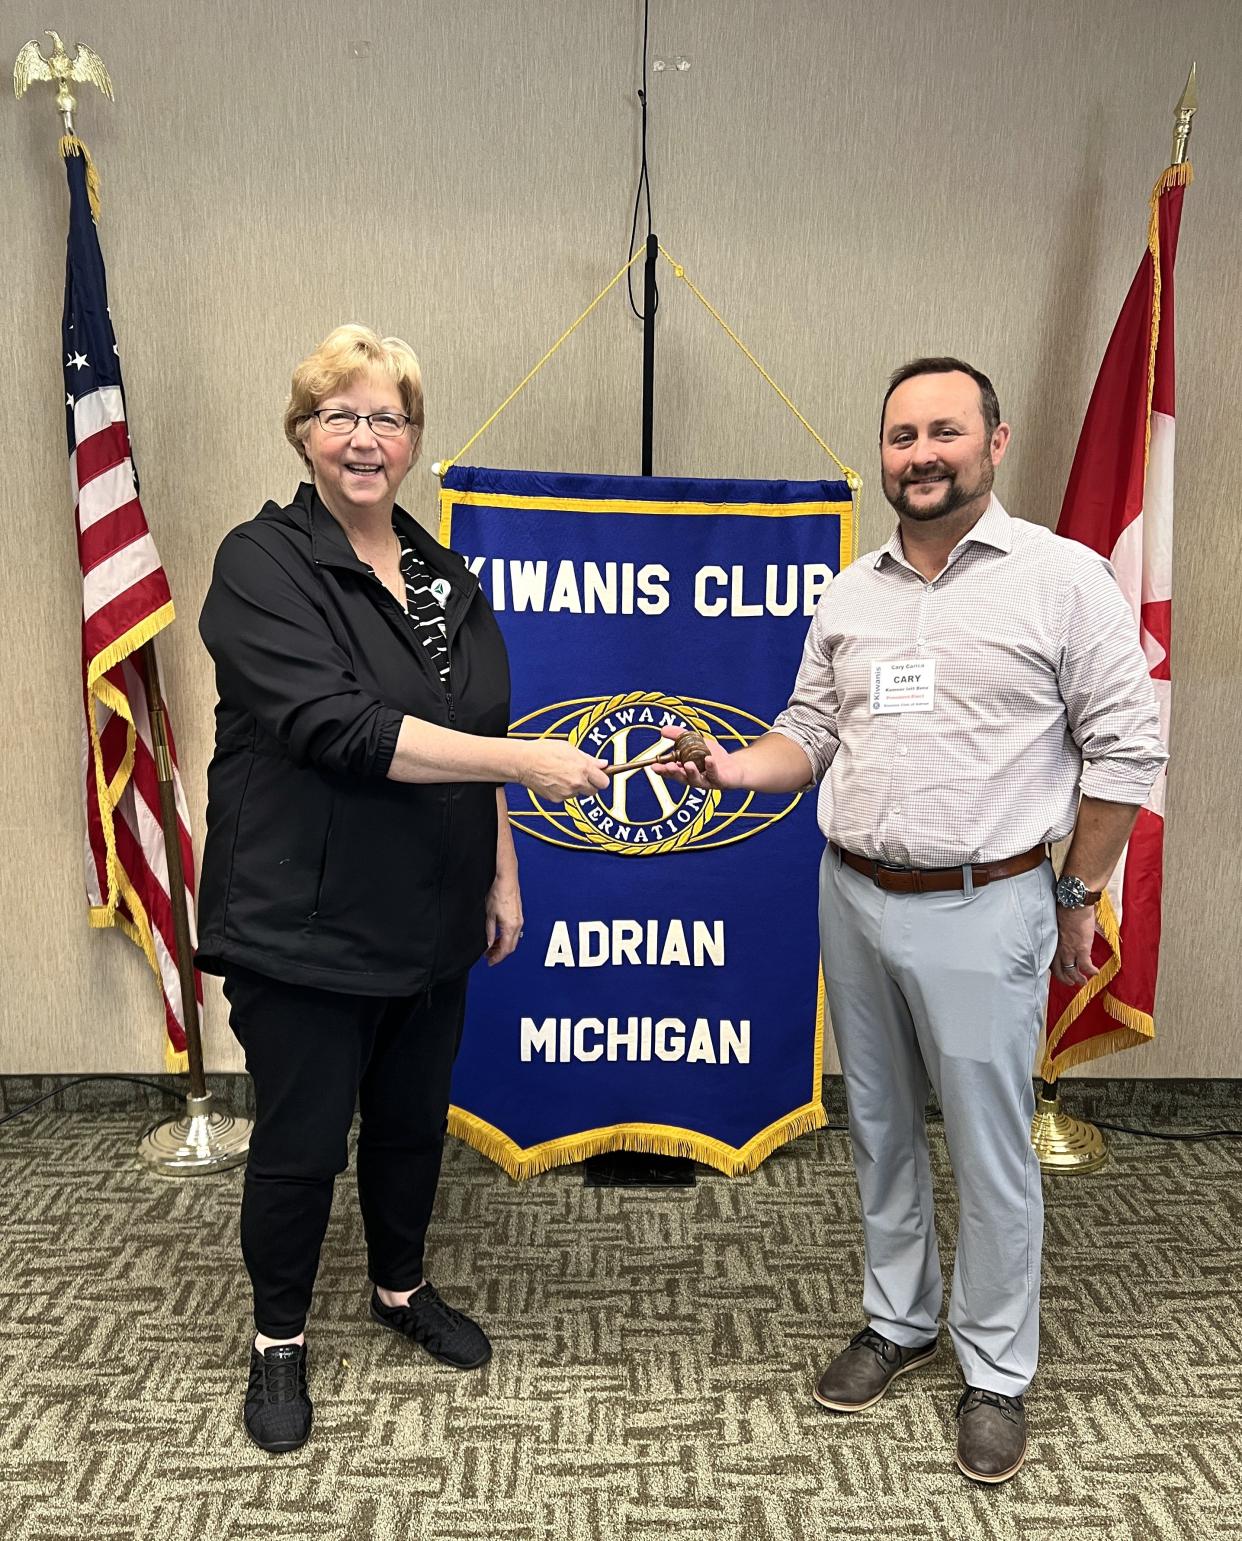 Pictured are Kiwanis Club of Adrian Past-President Lynne Punnett, left, and newly inducted President Cary Carrico, right, during the ceremonial “passing of the gavel," which signals the transfer of the presidency from the current, outgoing president to the new, incoming president for the next year.